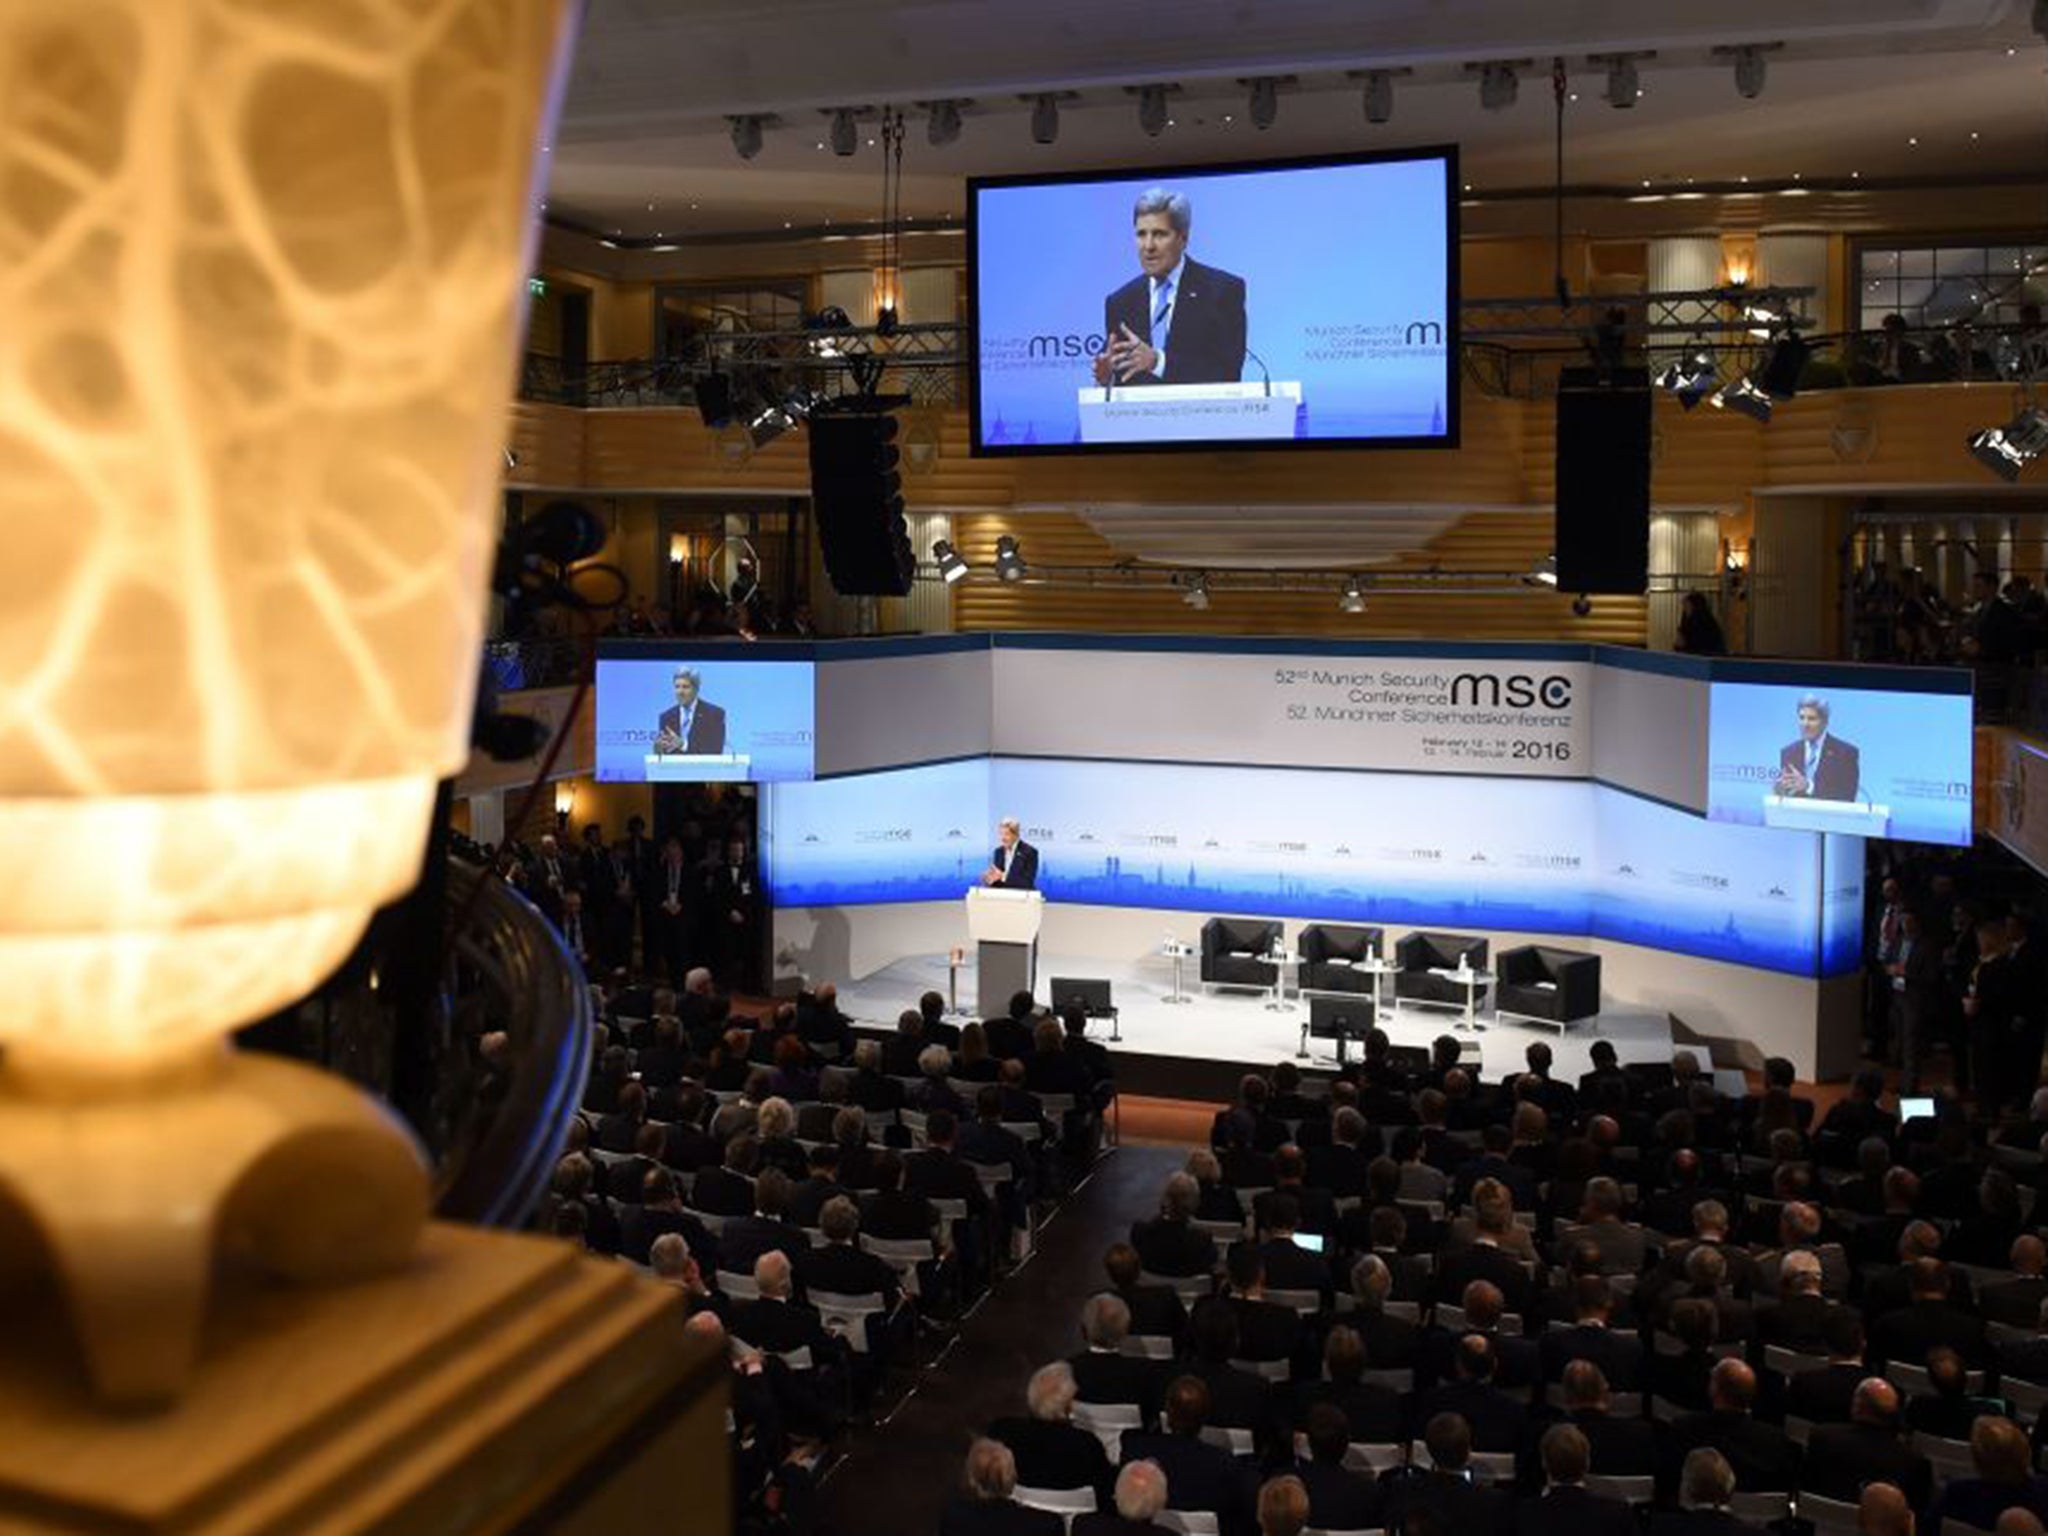 US Secretary of State John Kerry addresses the conference in Munich. He has reiterated that Russia is hitting “legitimate opposition groups” and civilians with its bombs